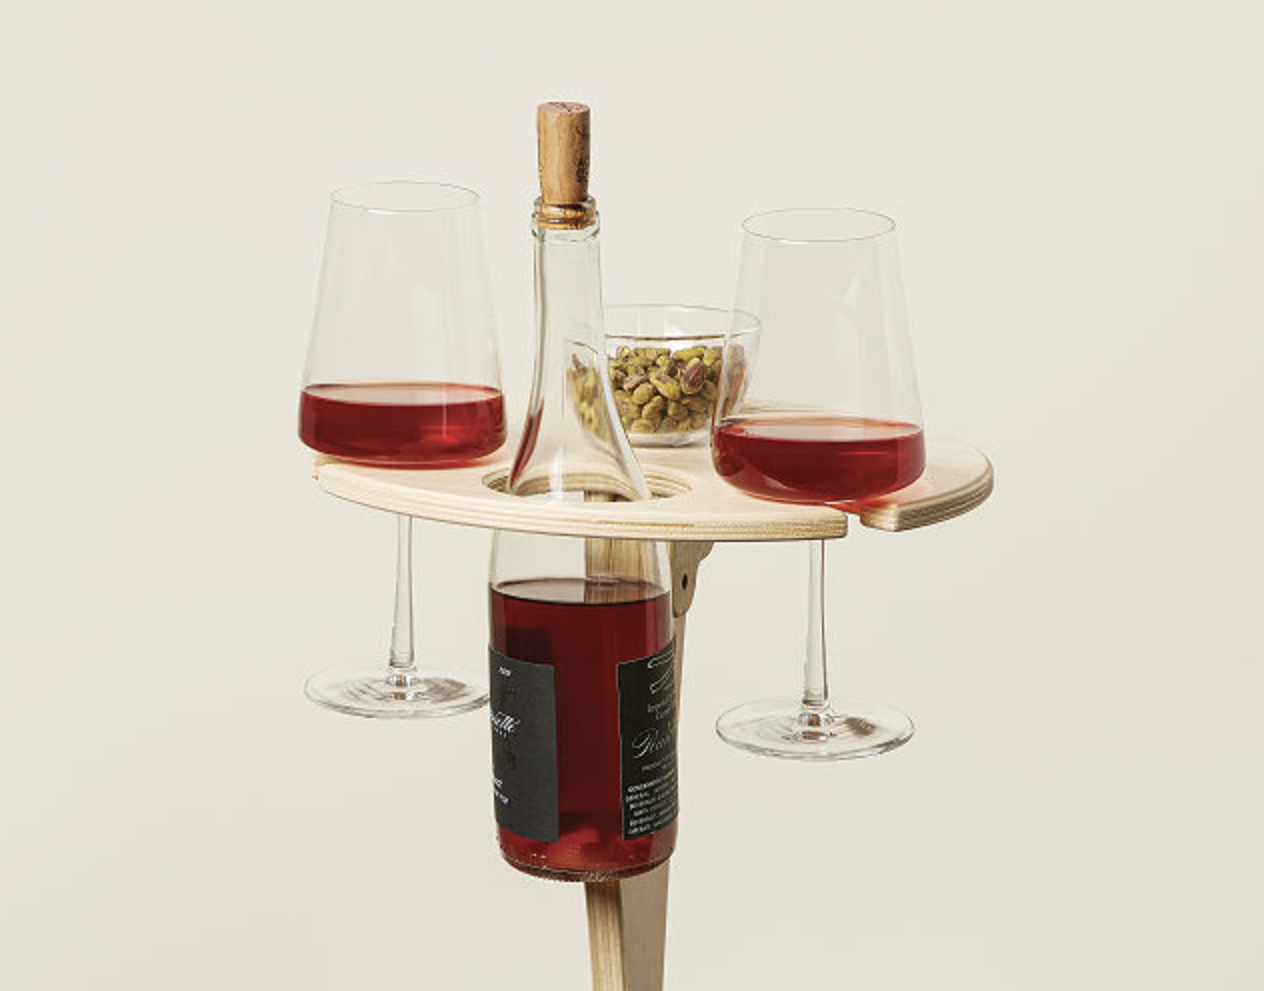 https://www.cnet.com/a/img/hub/2021/11/08/176d75a1-a47f-4294-a952-07c694be0843/wine-table.png